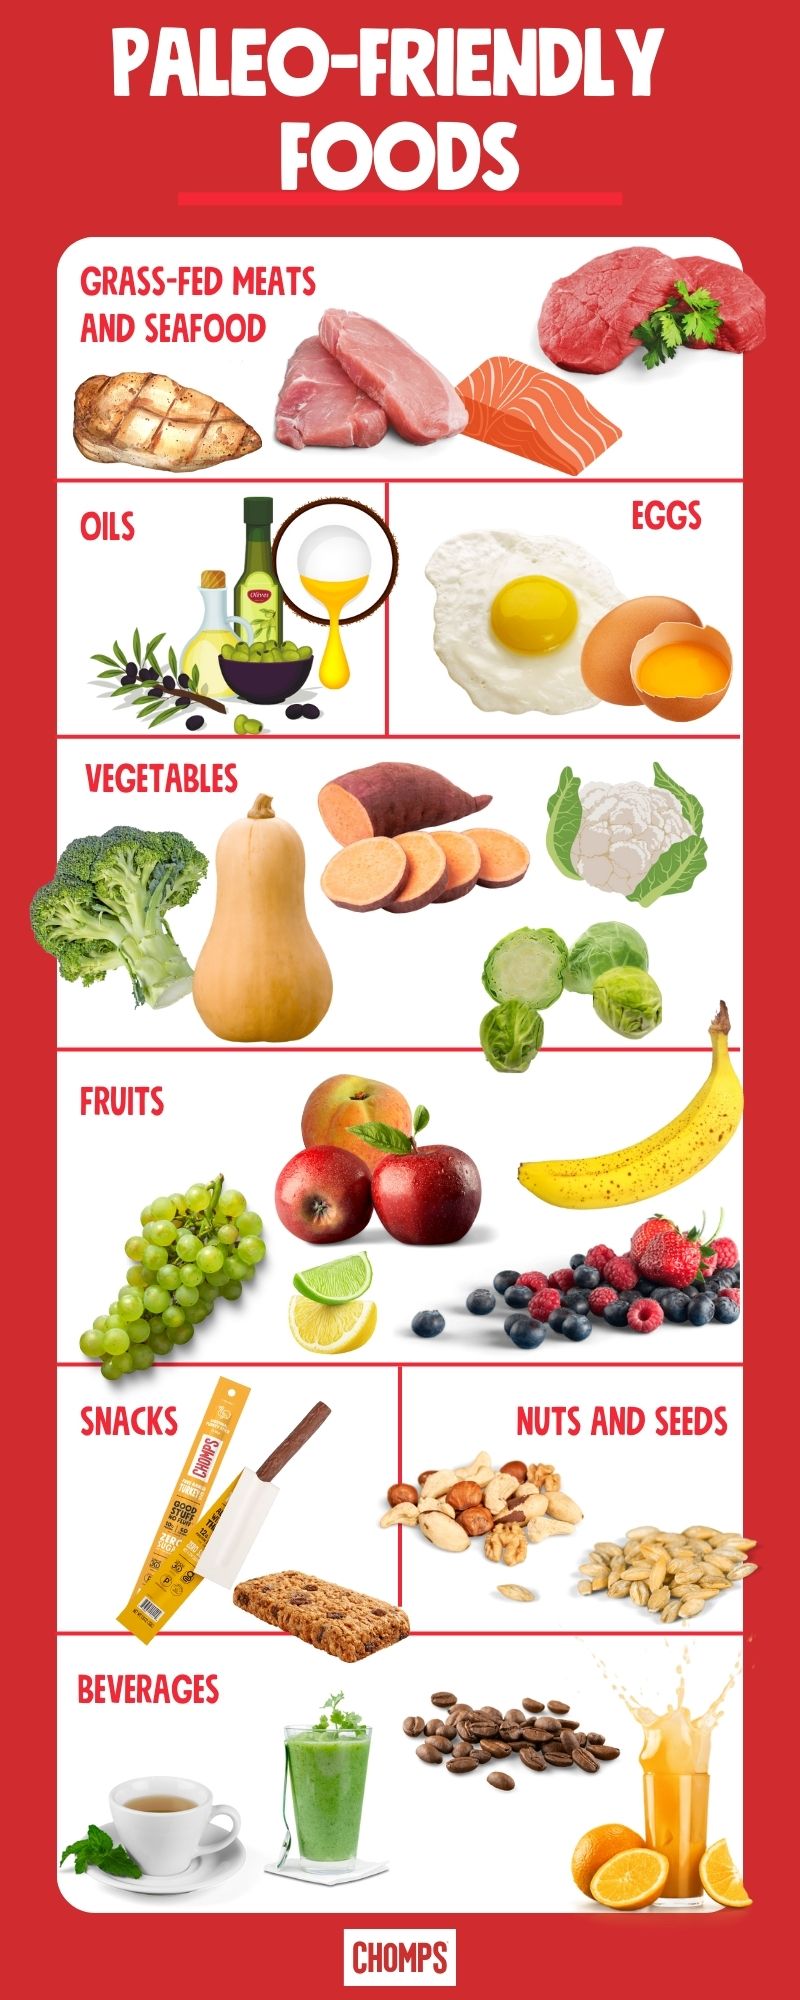 Paleo-Friendly Foods Infographic